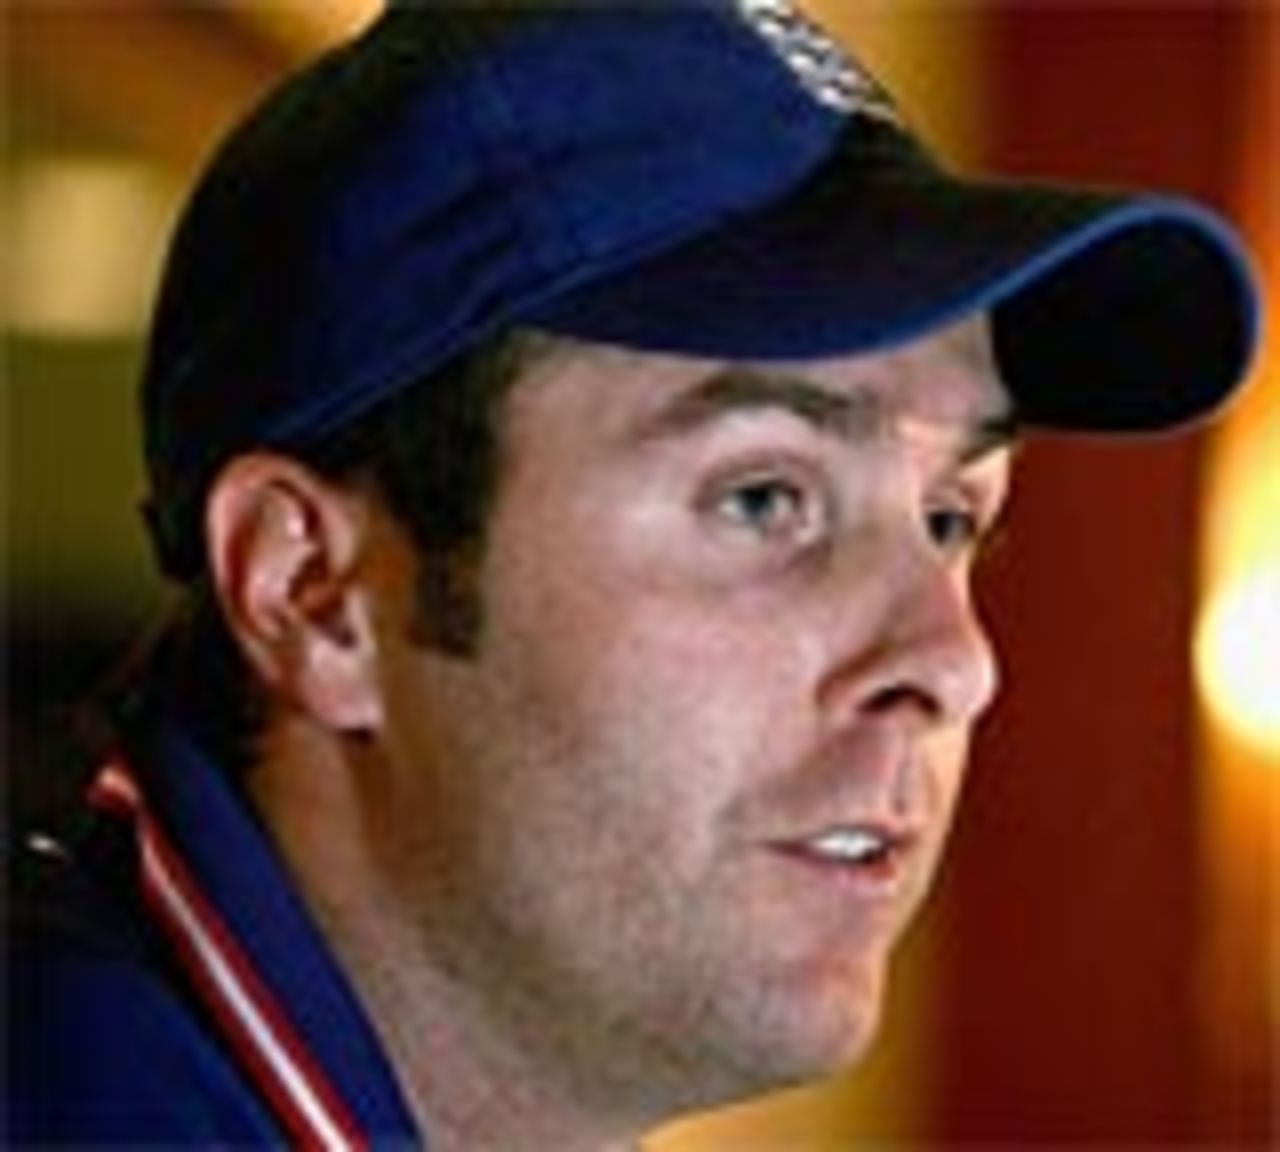 Michael Vaughan looks tired ahead of England's one-day series with Zimbabwe, November 2004